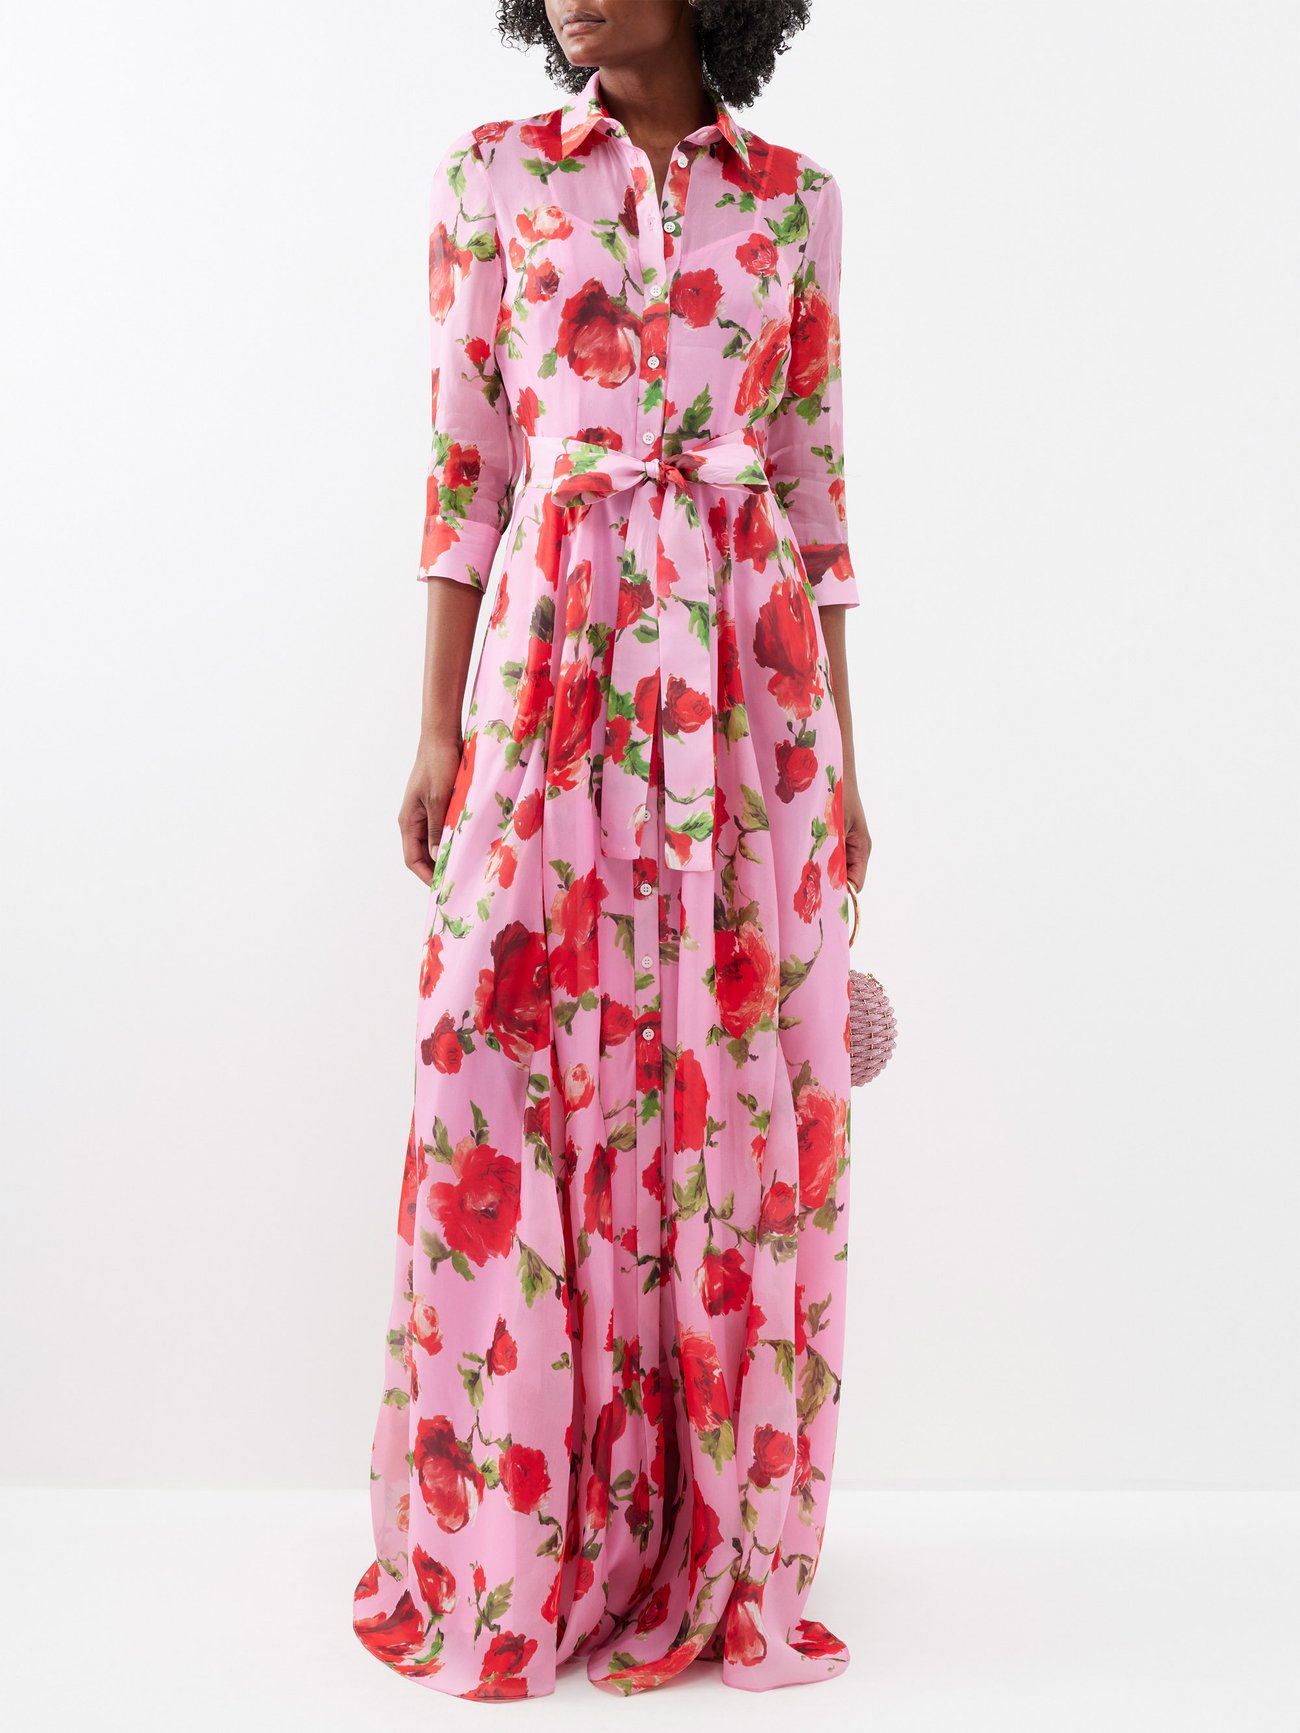 Carolina Herrera on X: Spring is the moment for bright colors — like, say,  a pink shirtdress and a cherry red Doma Insignia Satchel handbag or a fresh  green total look and